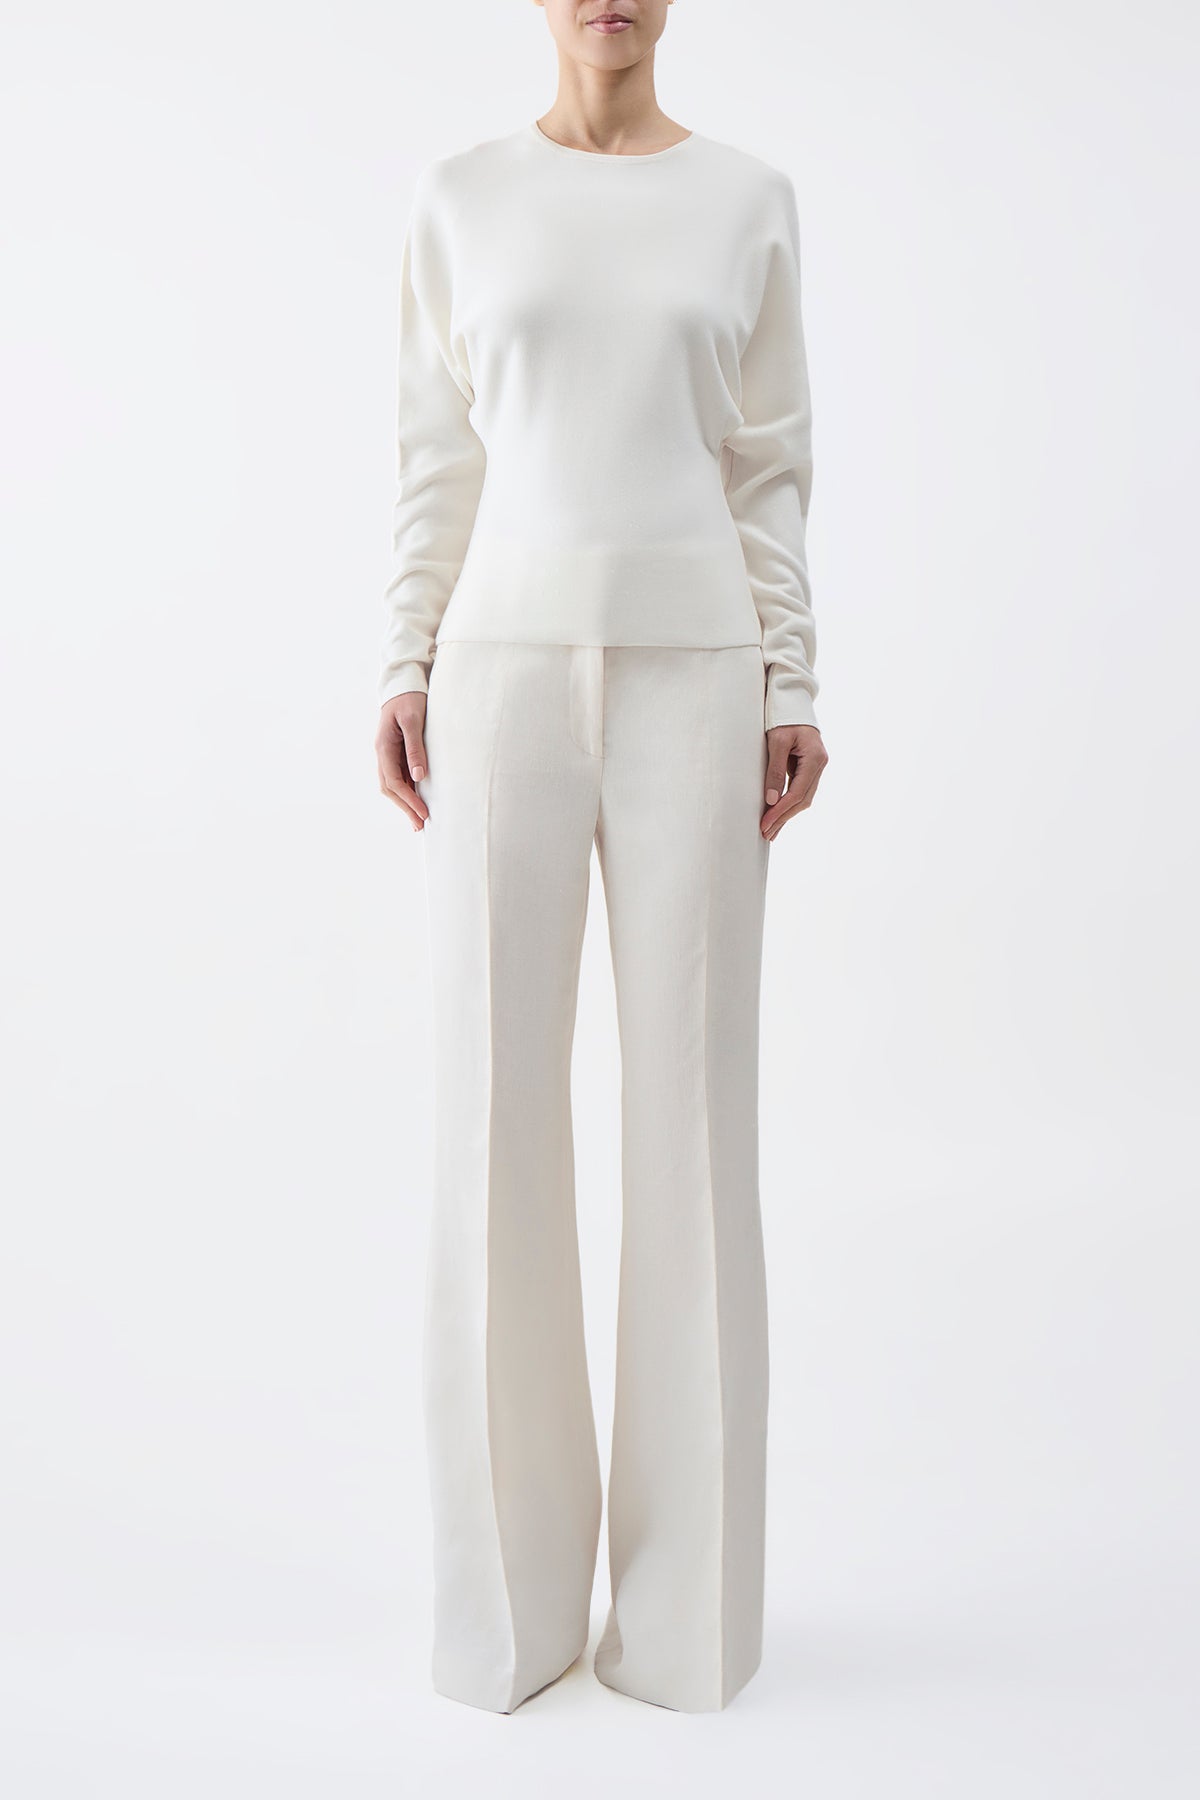 Theodore Knit Sweater in Ivory Silk Cashmere